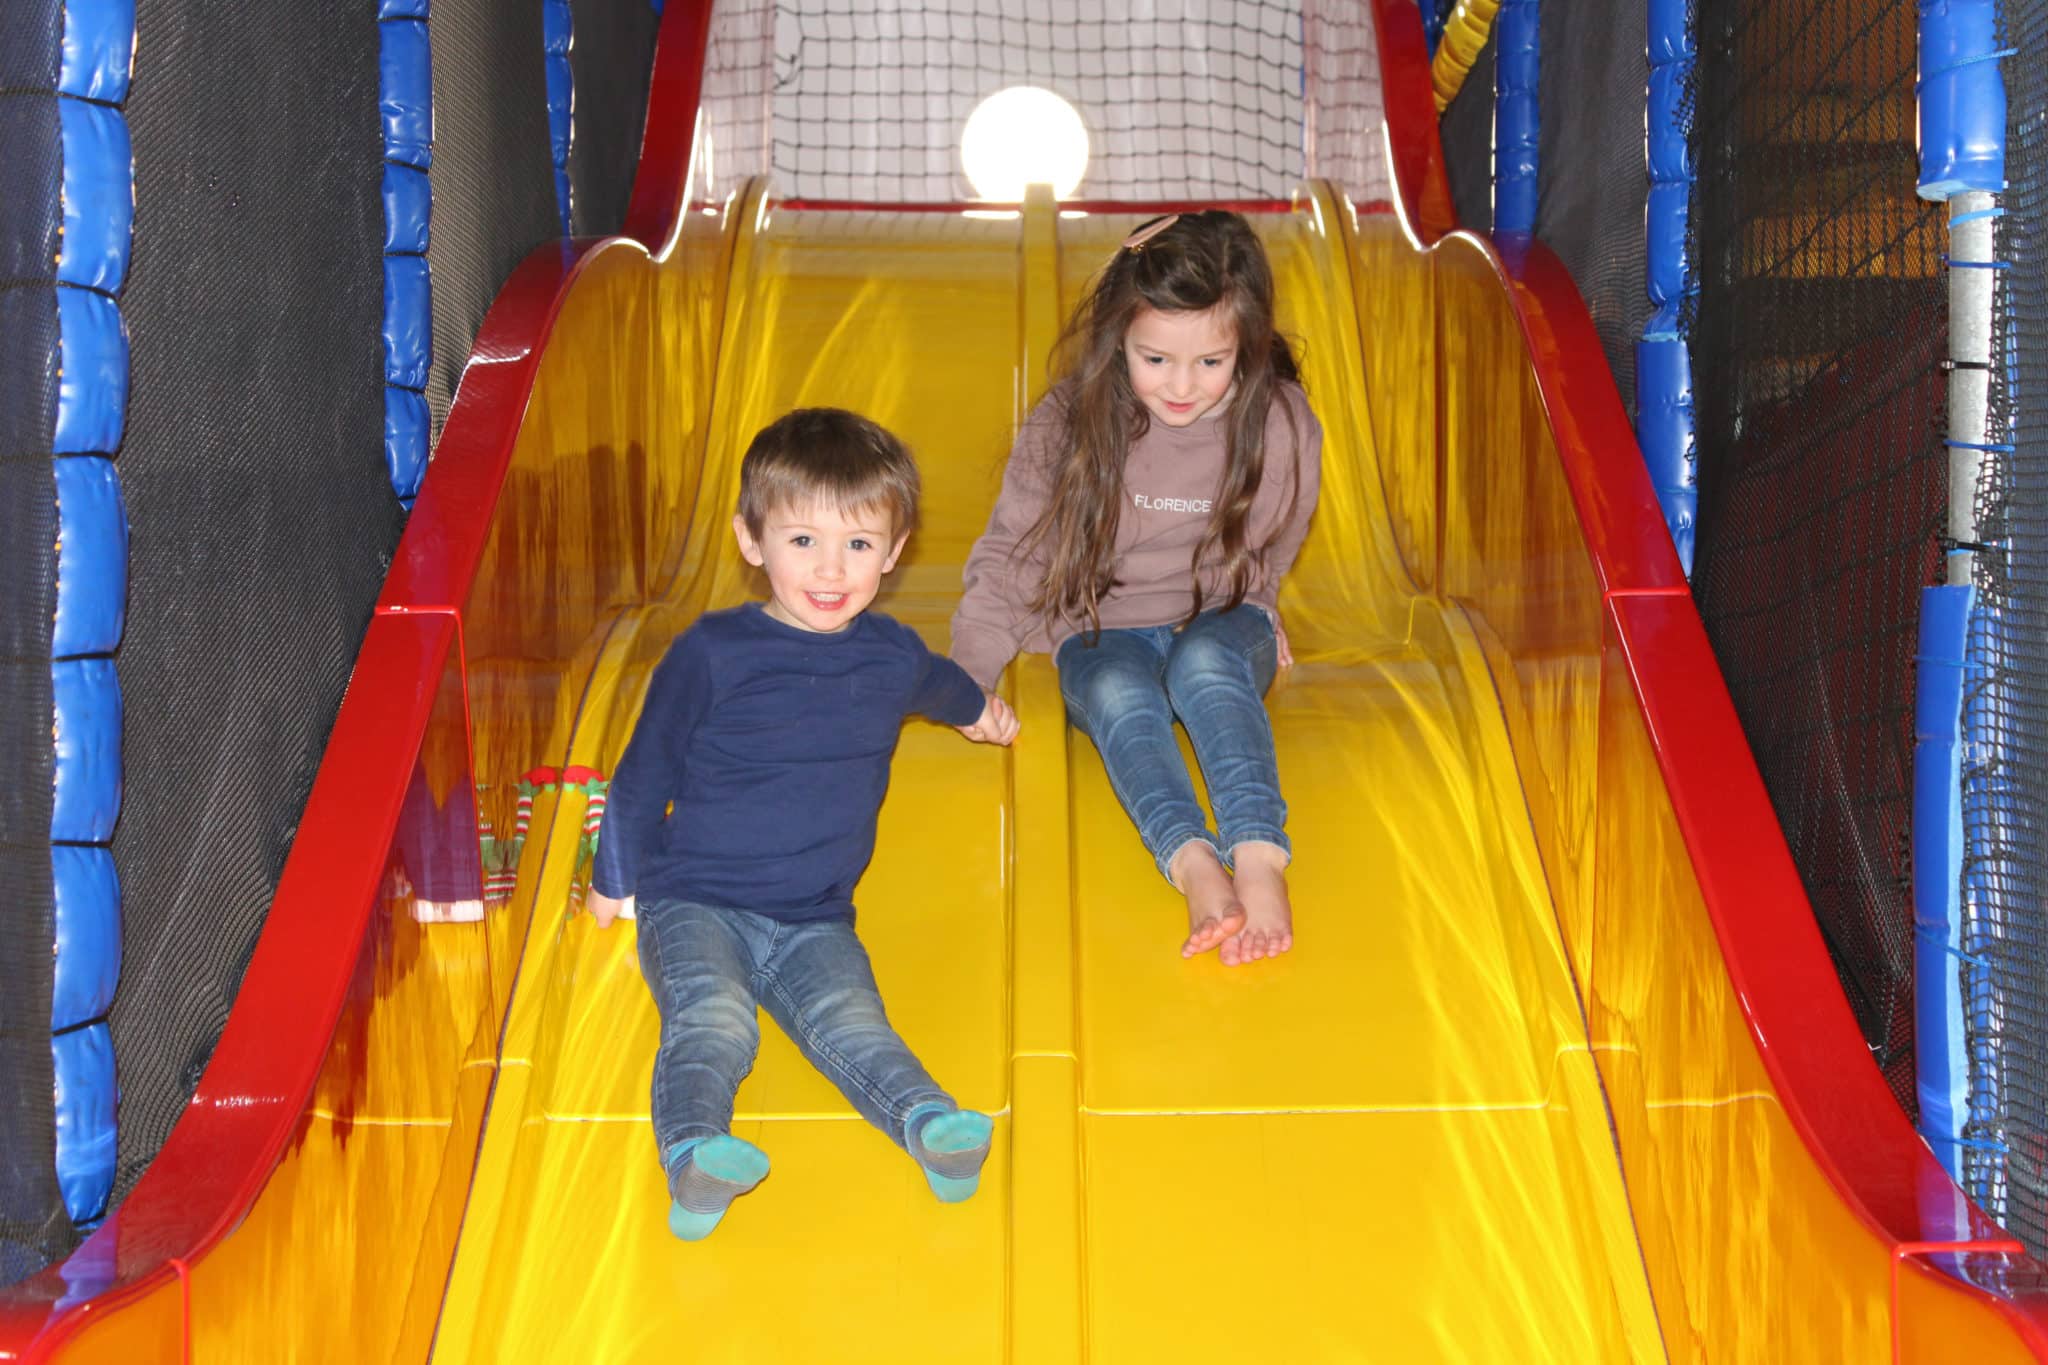 Two kids going down the slide in the soft play area